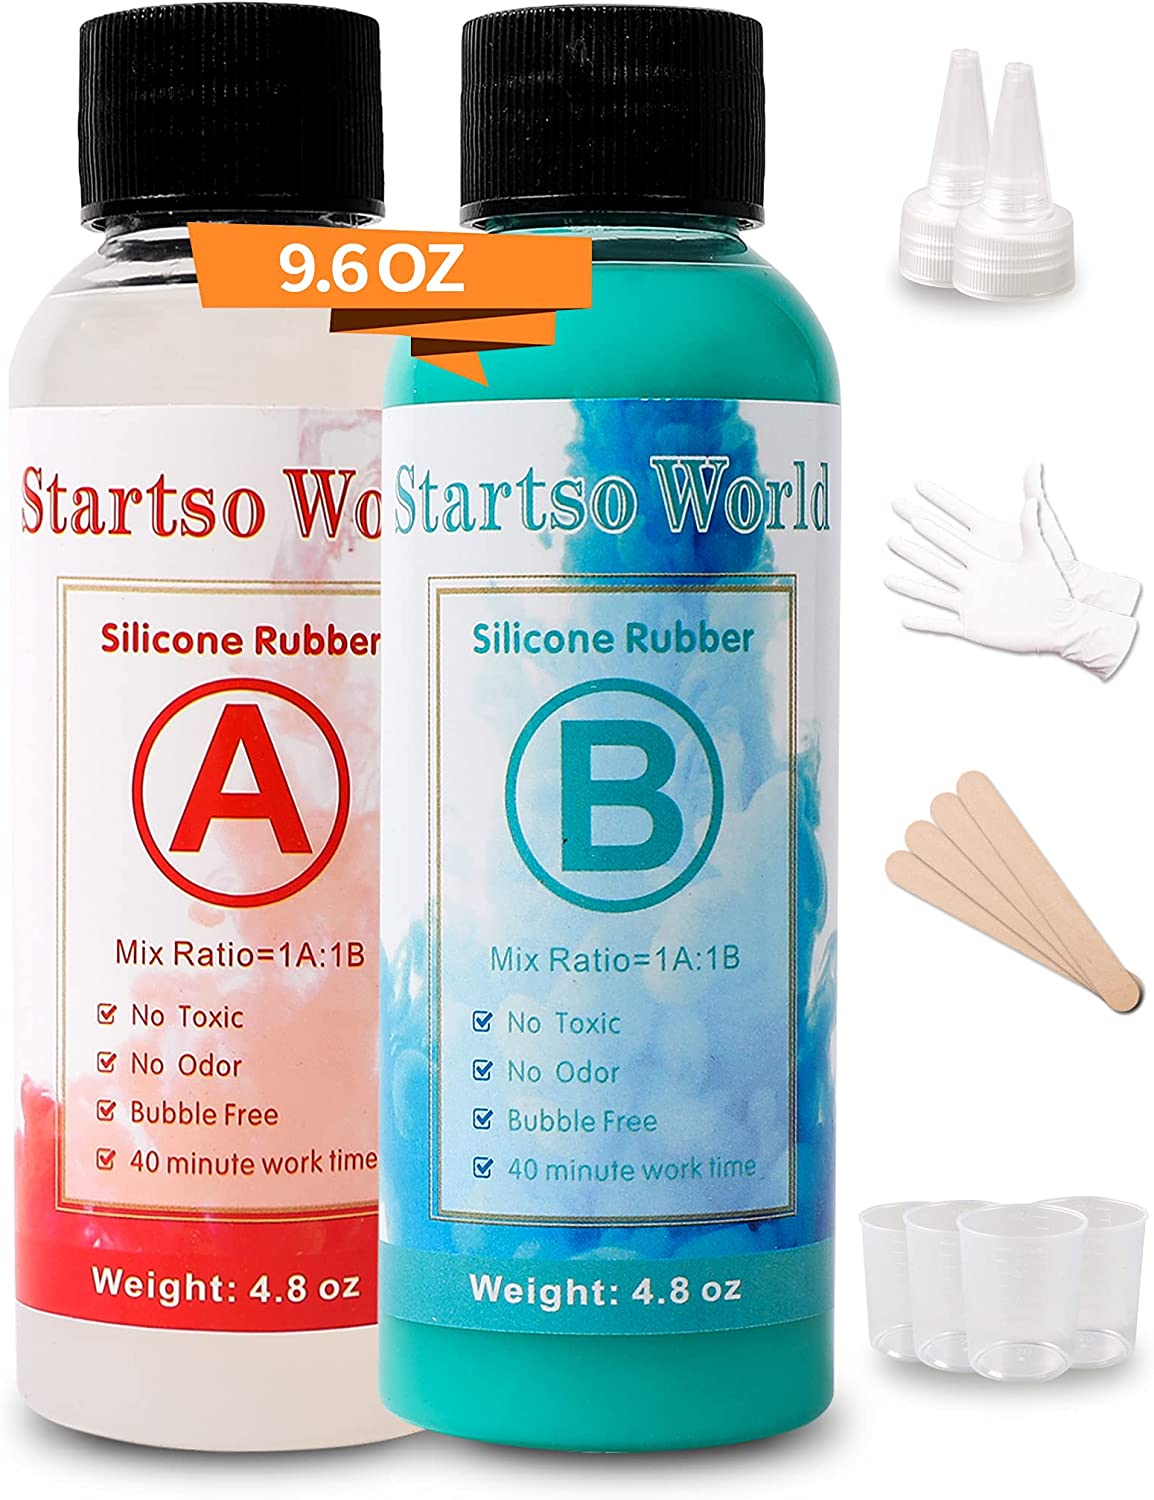 Startso World Mold Making Kit, 20A Turquoise Platinum RTV-2 Liquid Silicone  Rubber 9.6OZ for Casting Resin, Soap, Candle, Clay, DIY Molds-1:1 by Volume  with Tool 4Cups,4Sticks,2Droppers,1 Pair Gloves